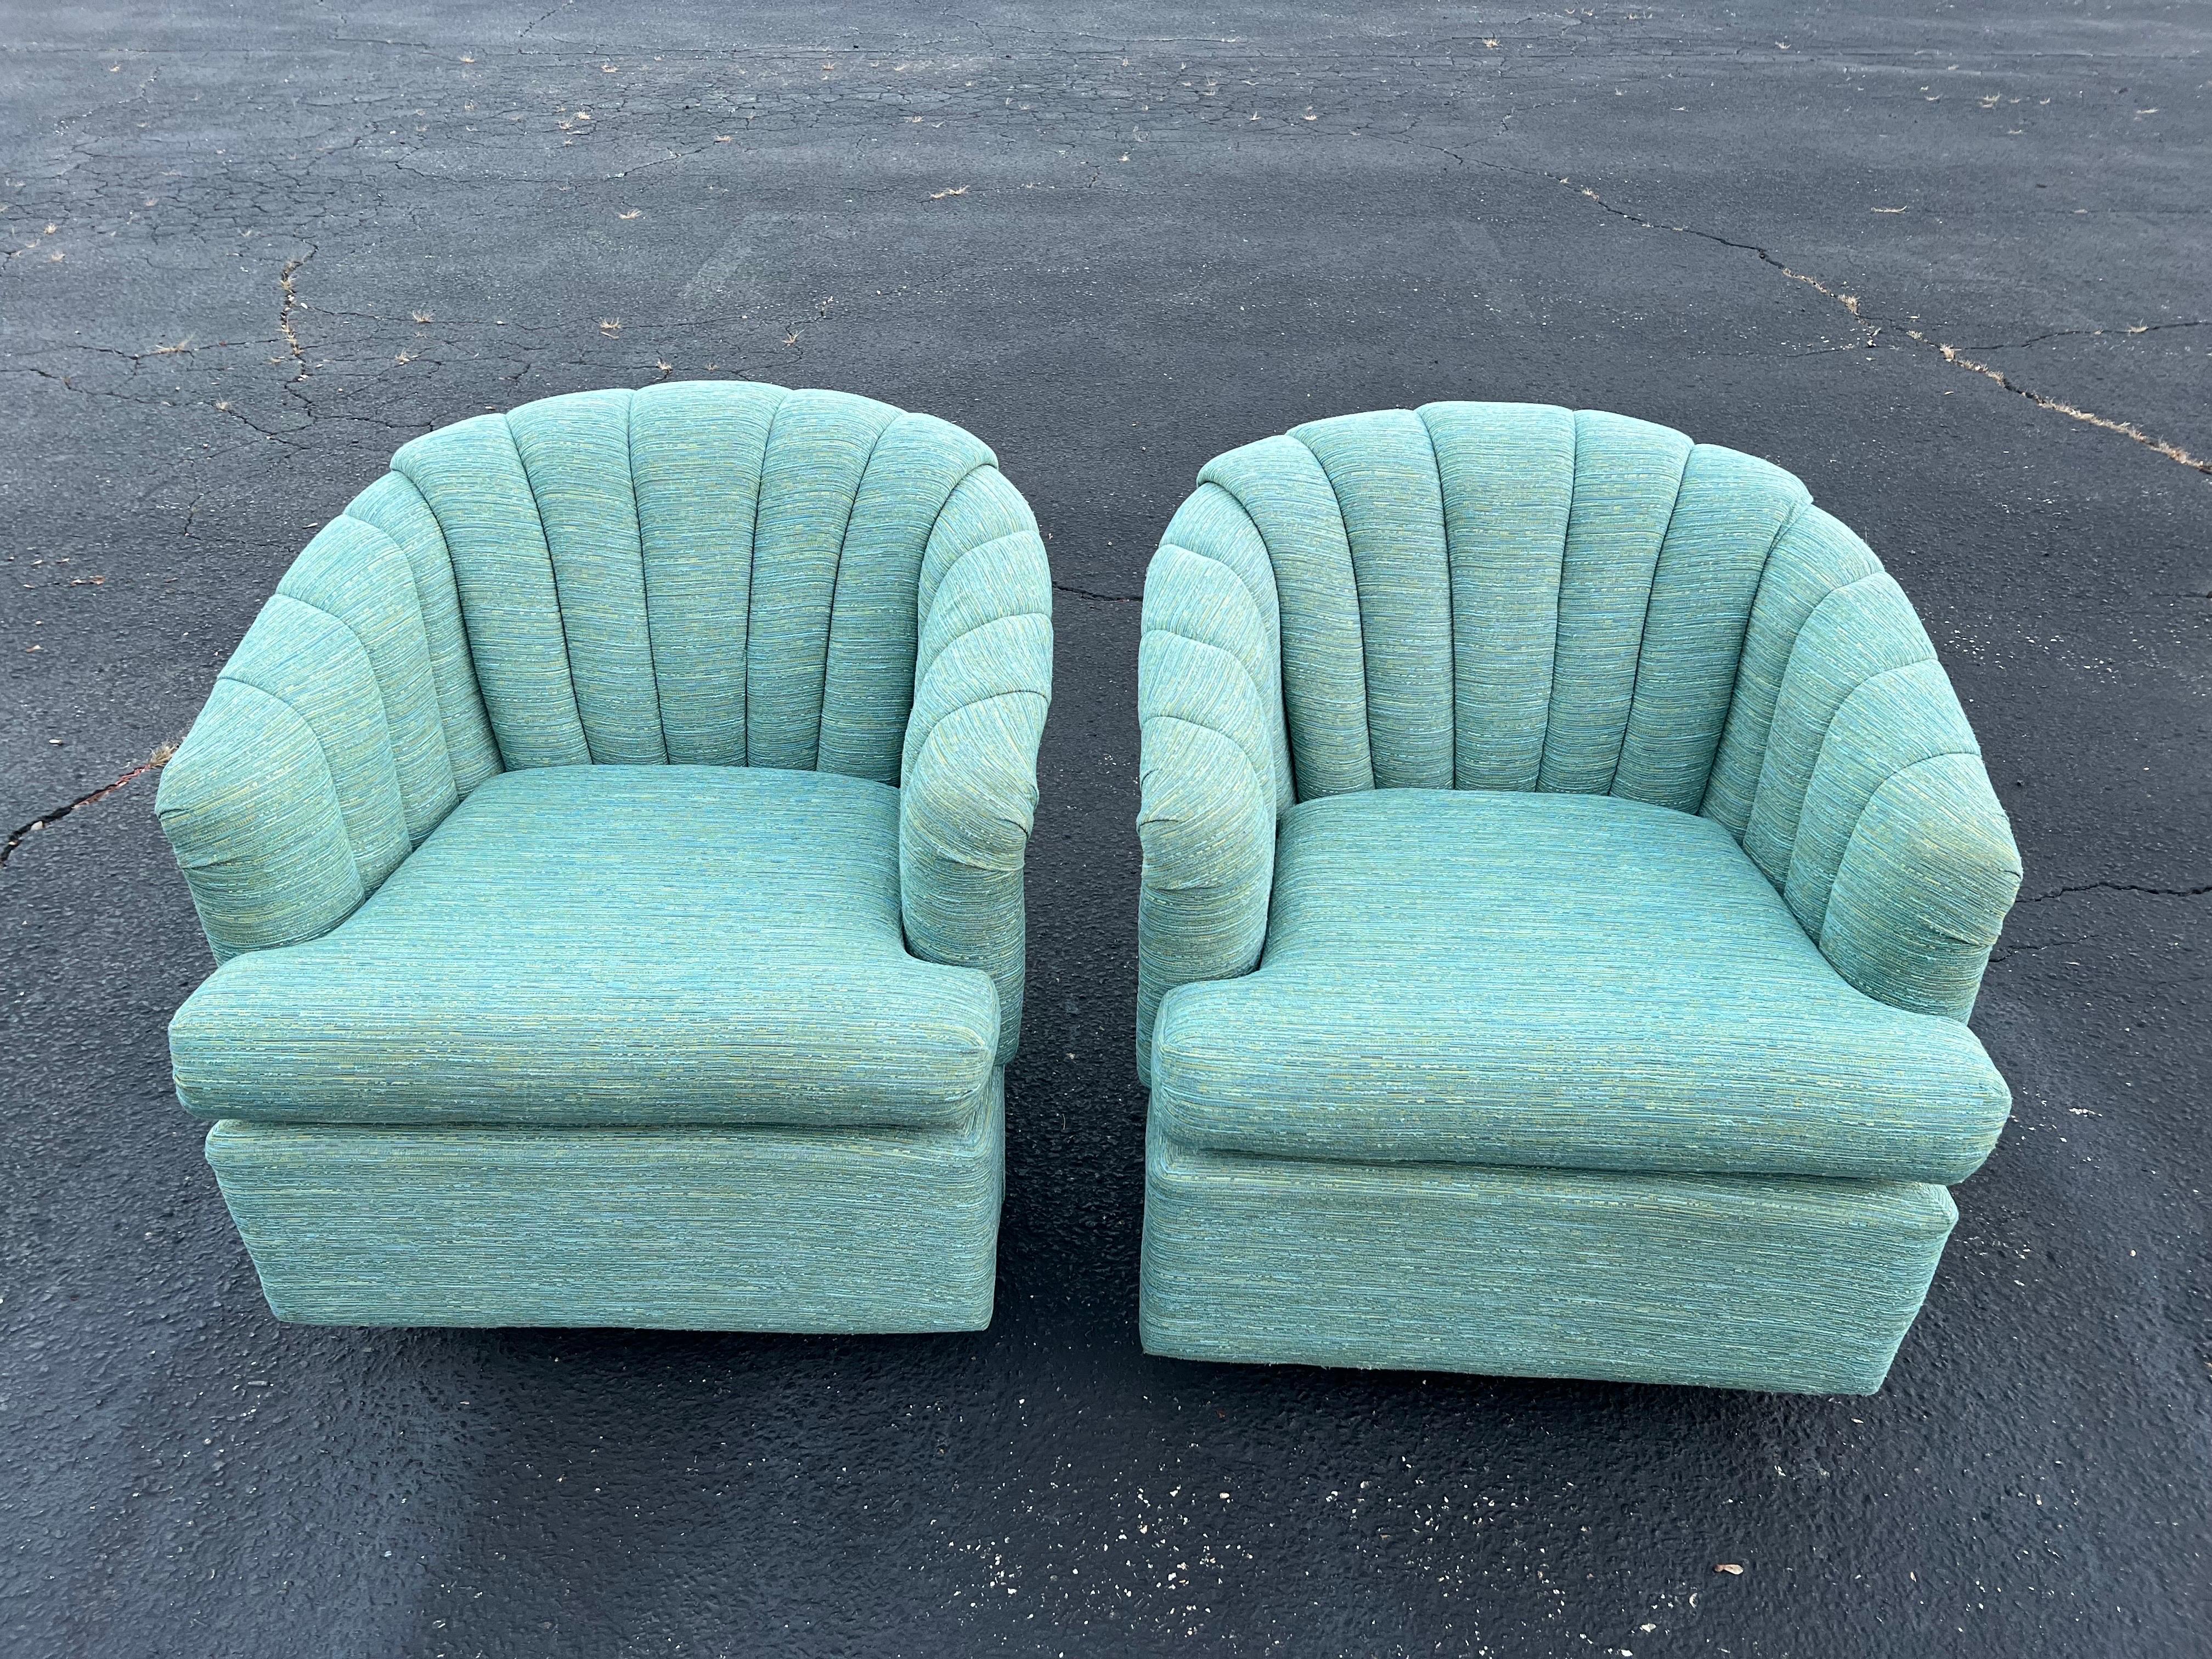 Pair of Turquoise Channel Back Swivel Chairs. These chairs swivel and rock and have a round metal swivel base. The upholstery has a multi color weaved look with a cream background.. These chairs are by Best Home Furnishings out of Indiana.